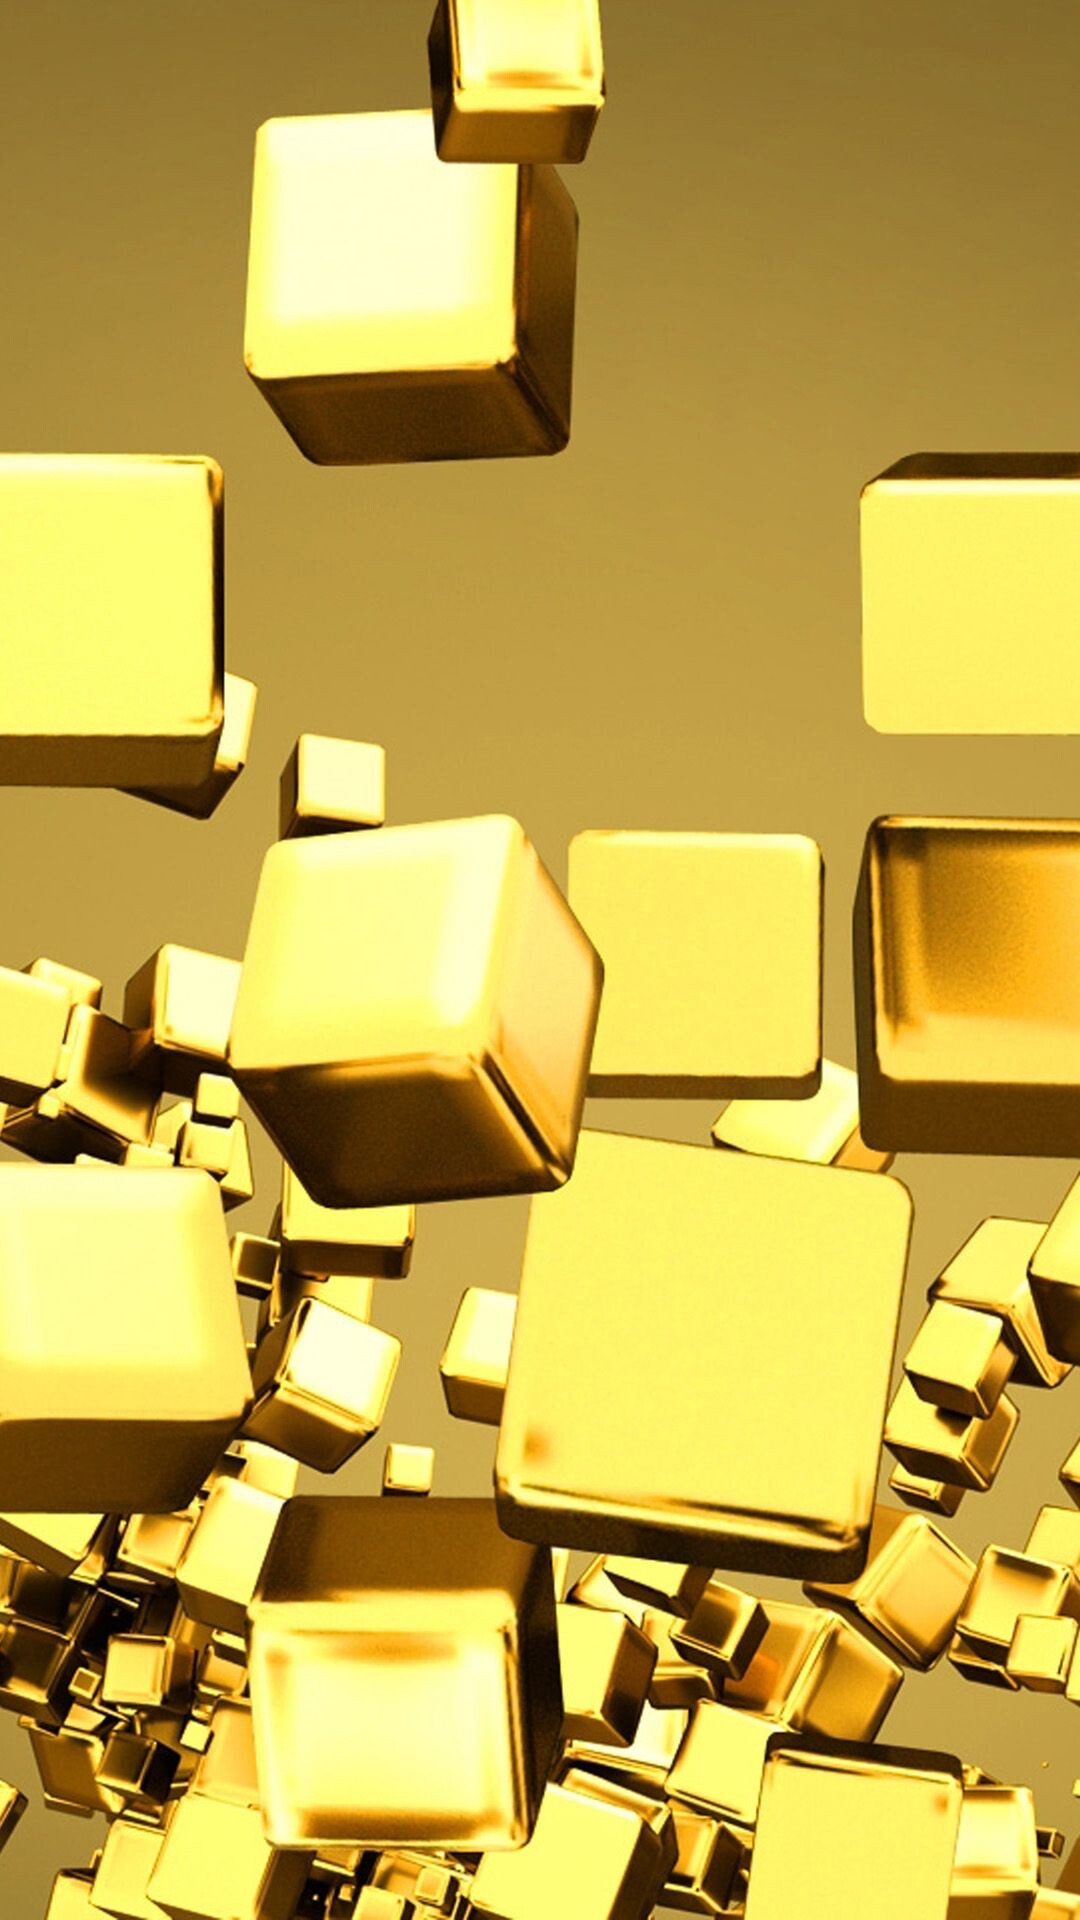 Gold: Golden cubes, 3d blocks, Geometric shapes, A three-dimensional solid object made of yellow metal. 1080x1920 Full HD Wallpaper.